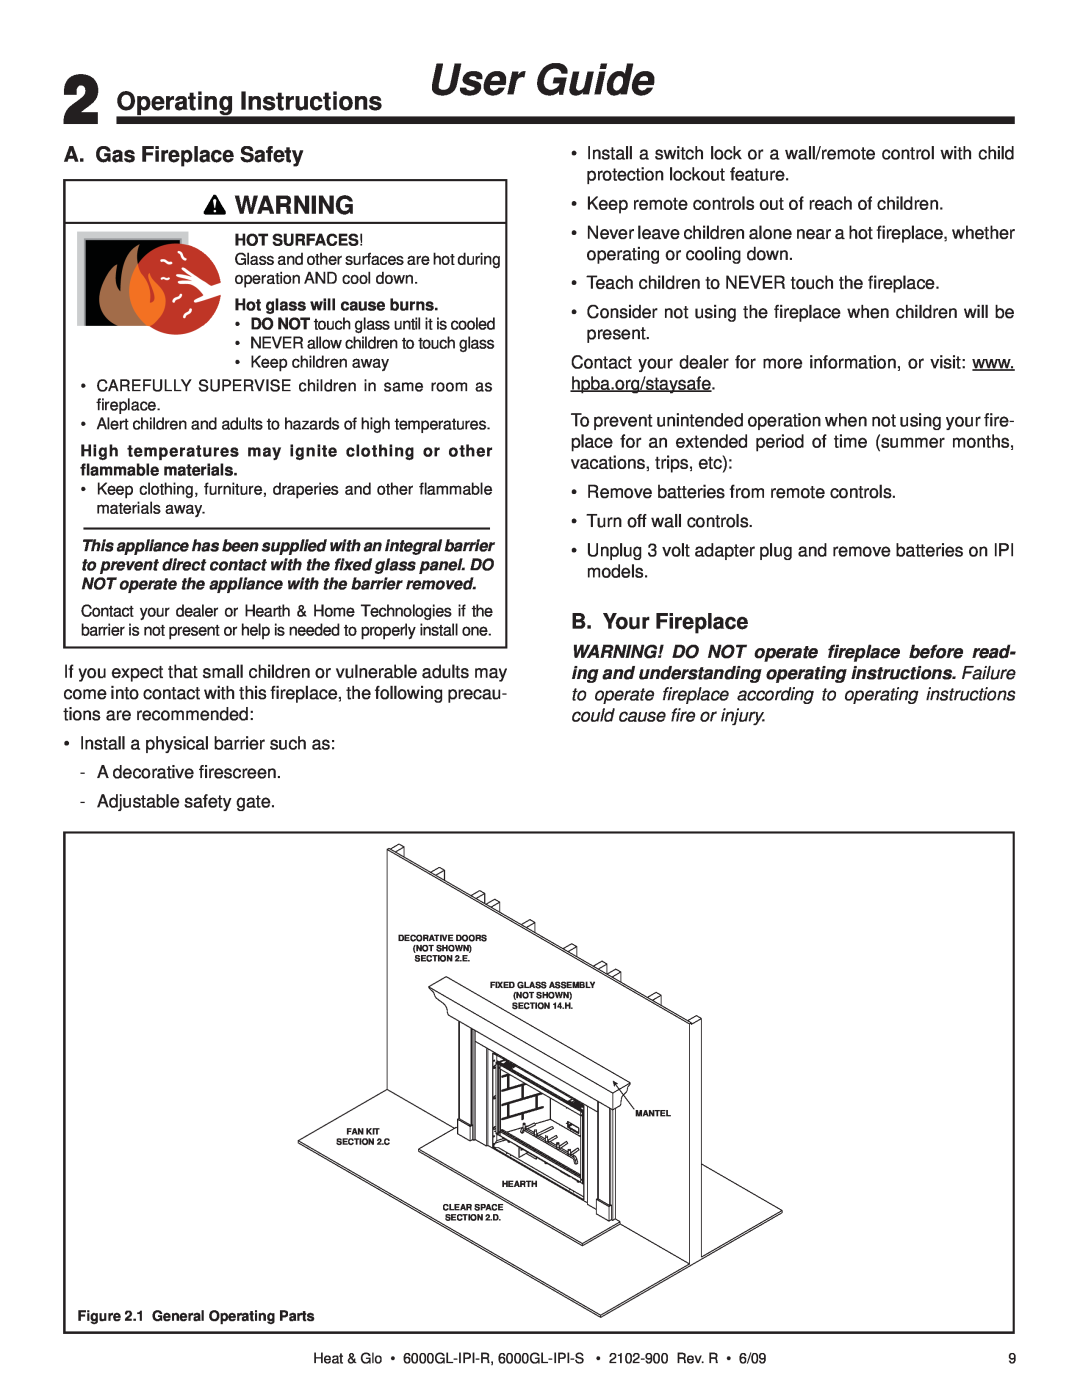 Heat & Glo LifeStyle 6000GL-IPILP-R Operating Instructions User Guide, A. Gas Fireplace Safety, B. Your Fireplace 